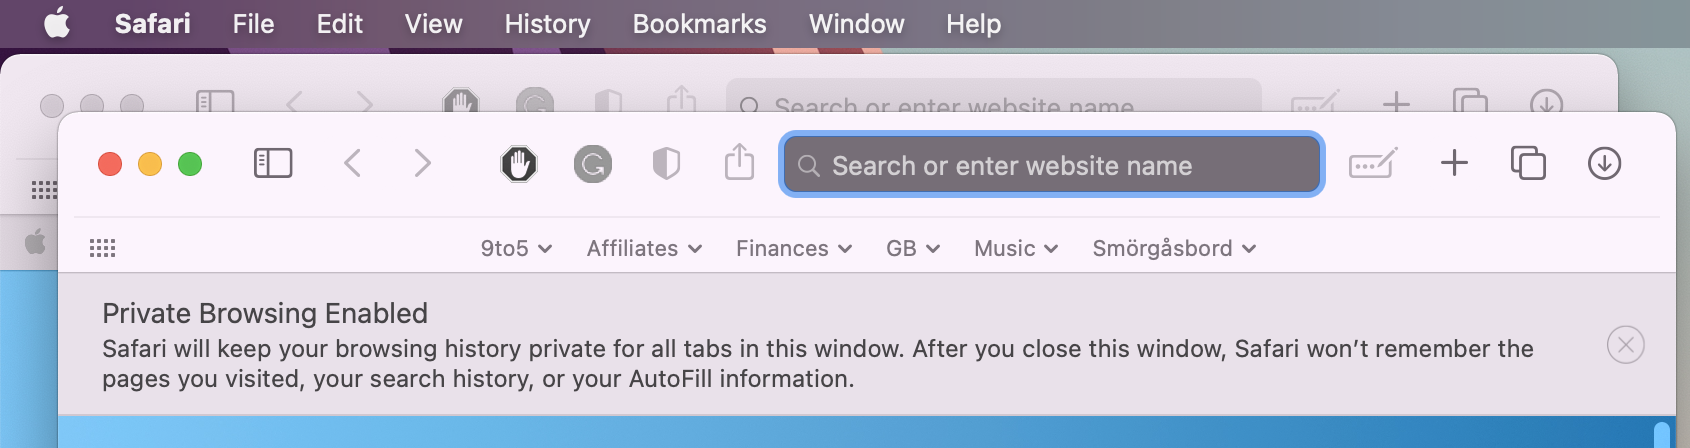 How to use Private Browsing on Mac walkthrough 2